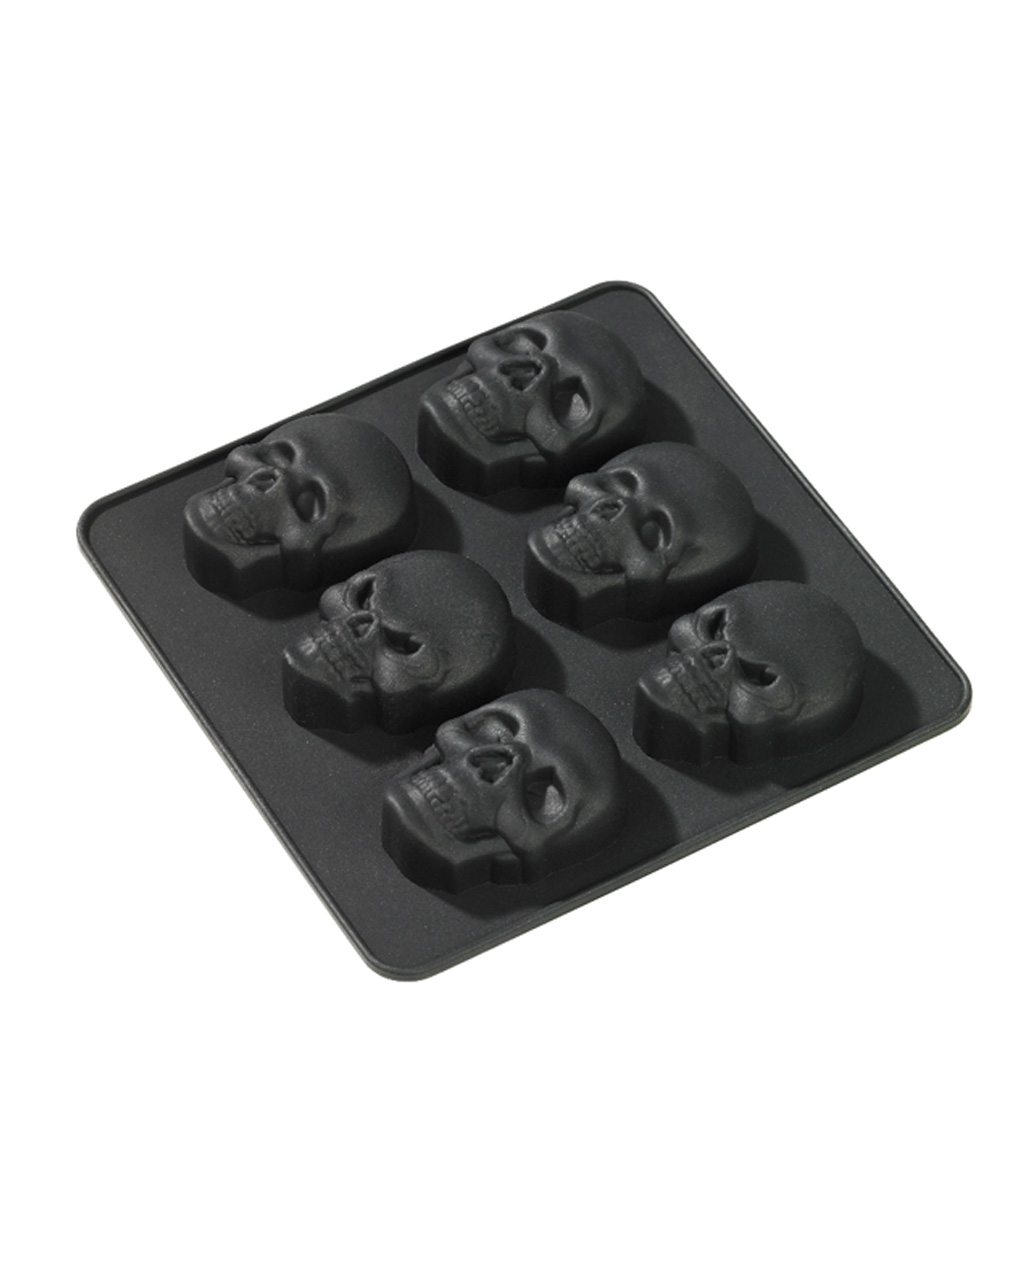 2 skull and bones,spider and webs,skulls Set of 2 Spooky Halloween Shaped Ice Cube Tray/Food Molds 